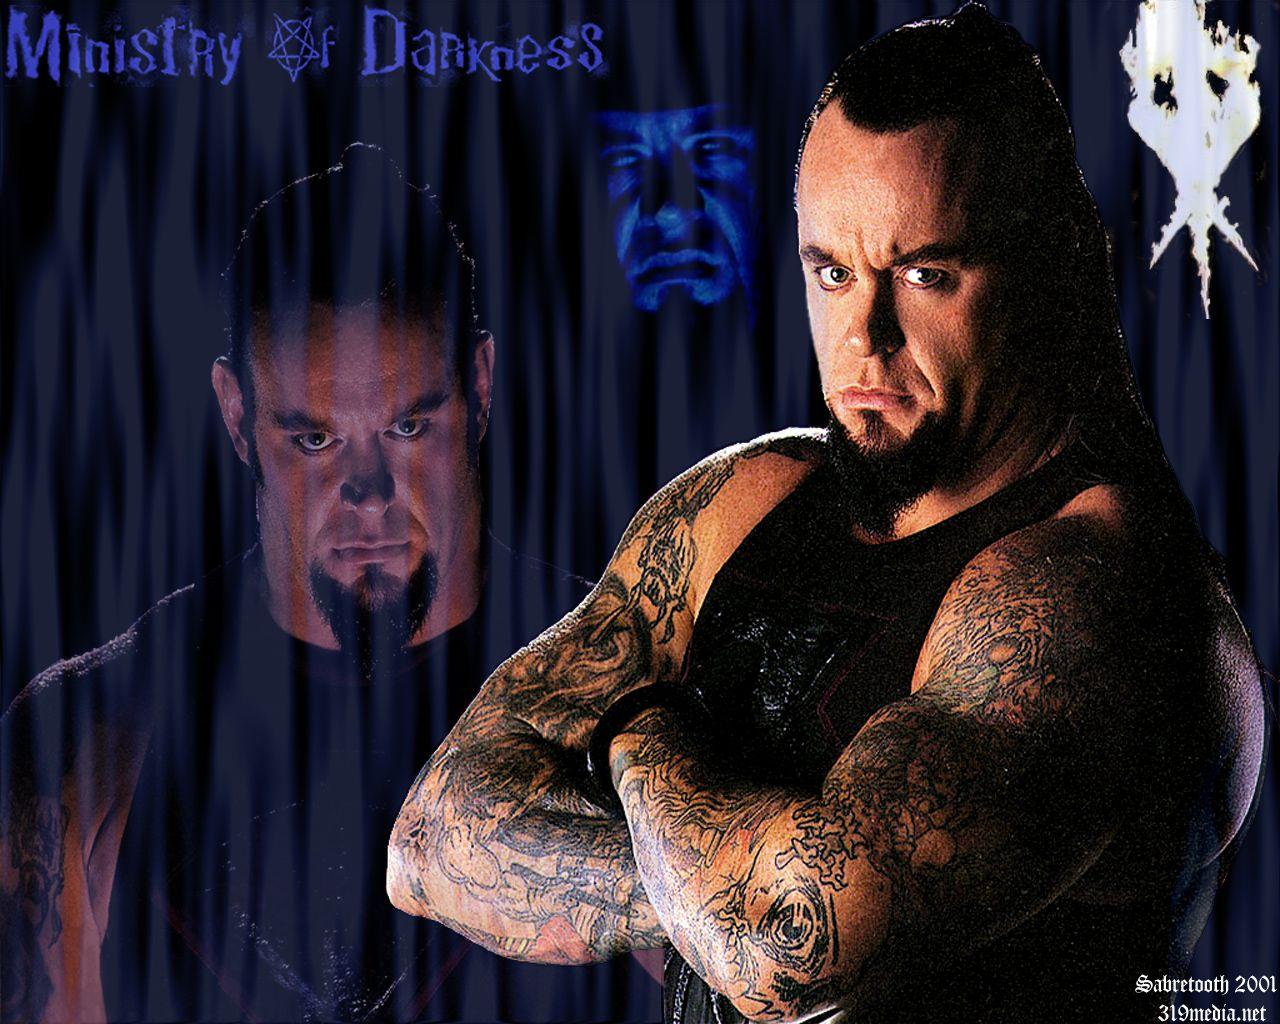 Ministry of Darkness Undertaker Wallpaper and Background